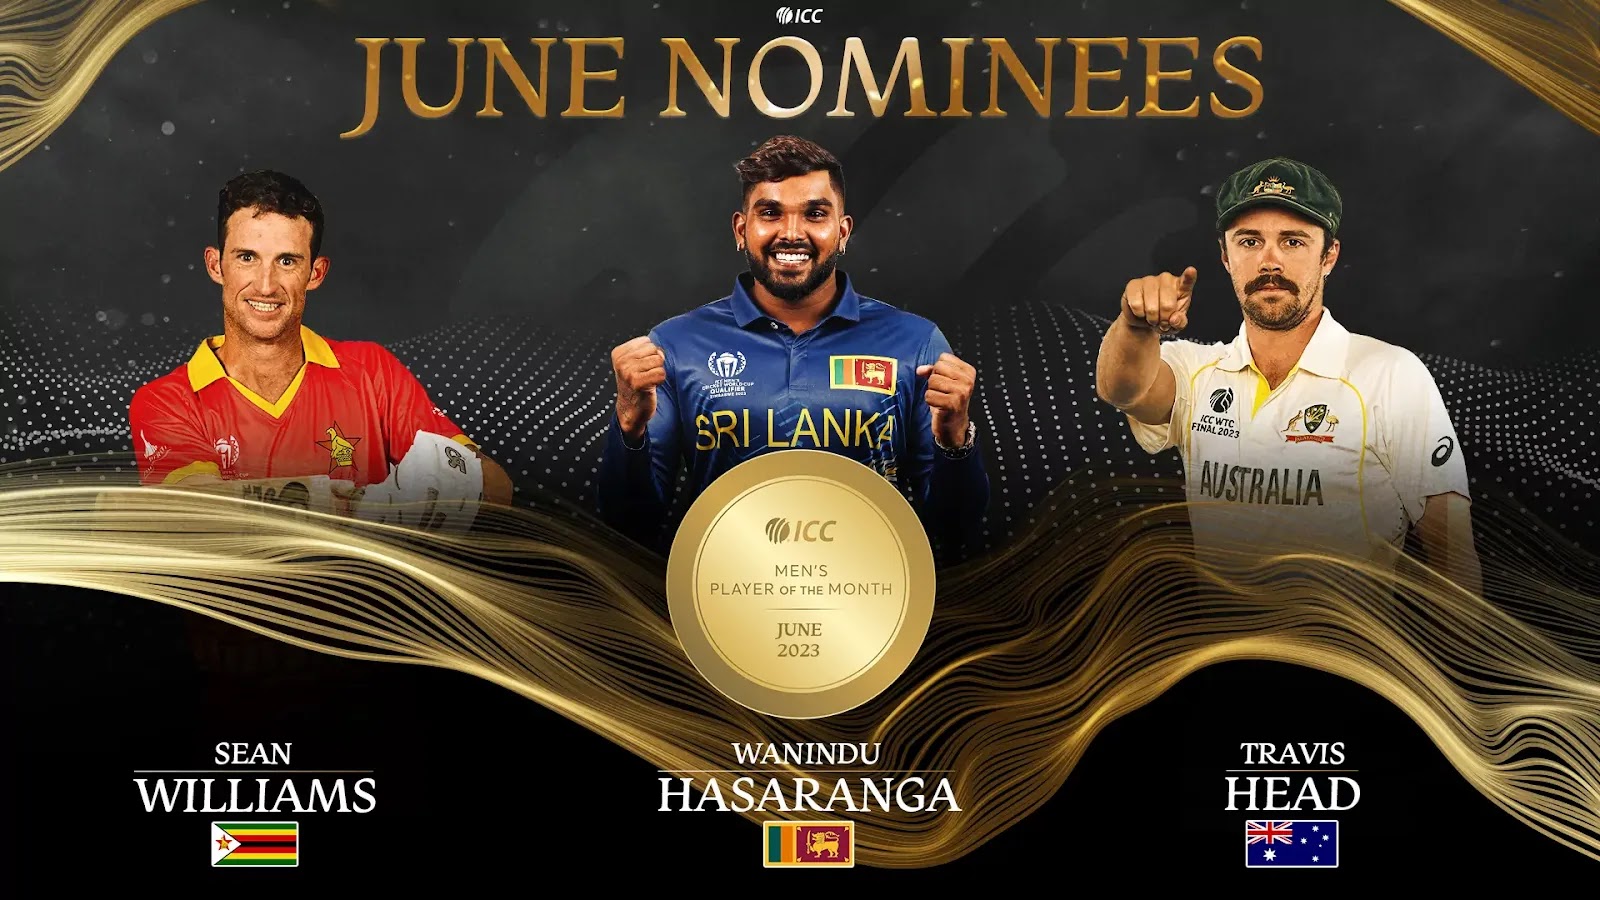 ICC Player of the Month Travis Head Sean Williams and Wanindu Hasaranga Nominated for June